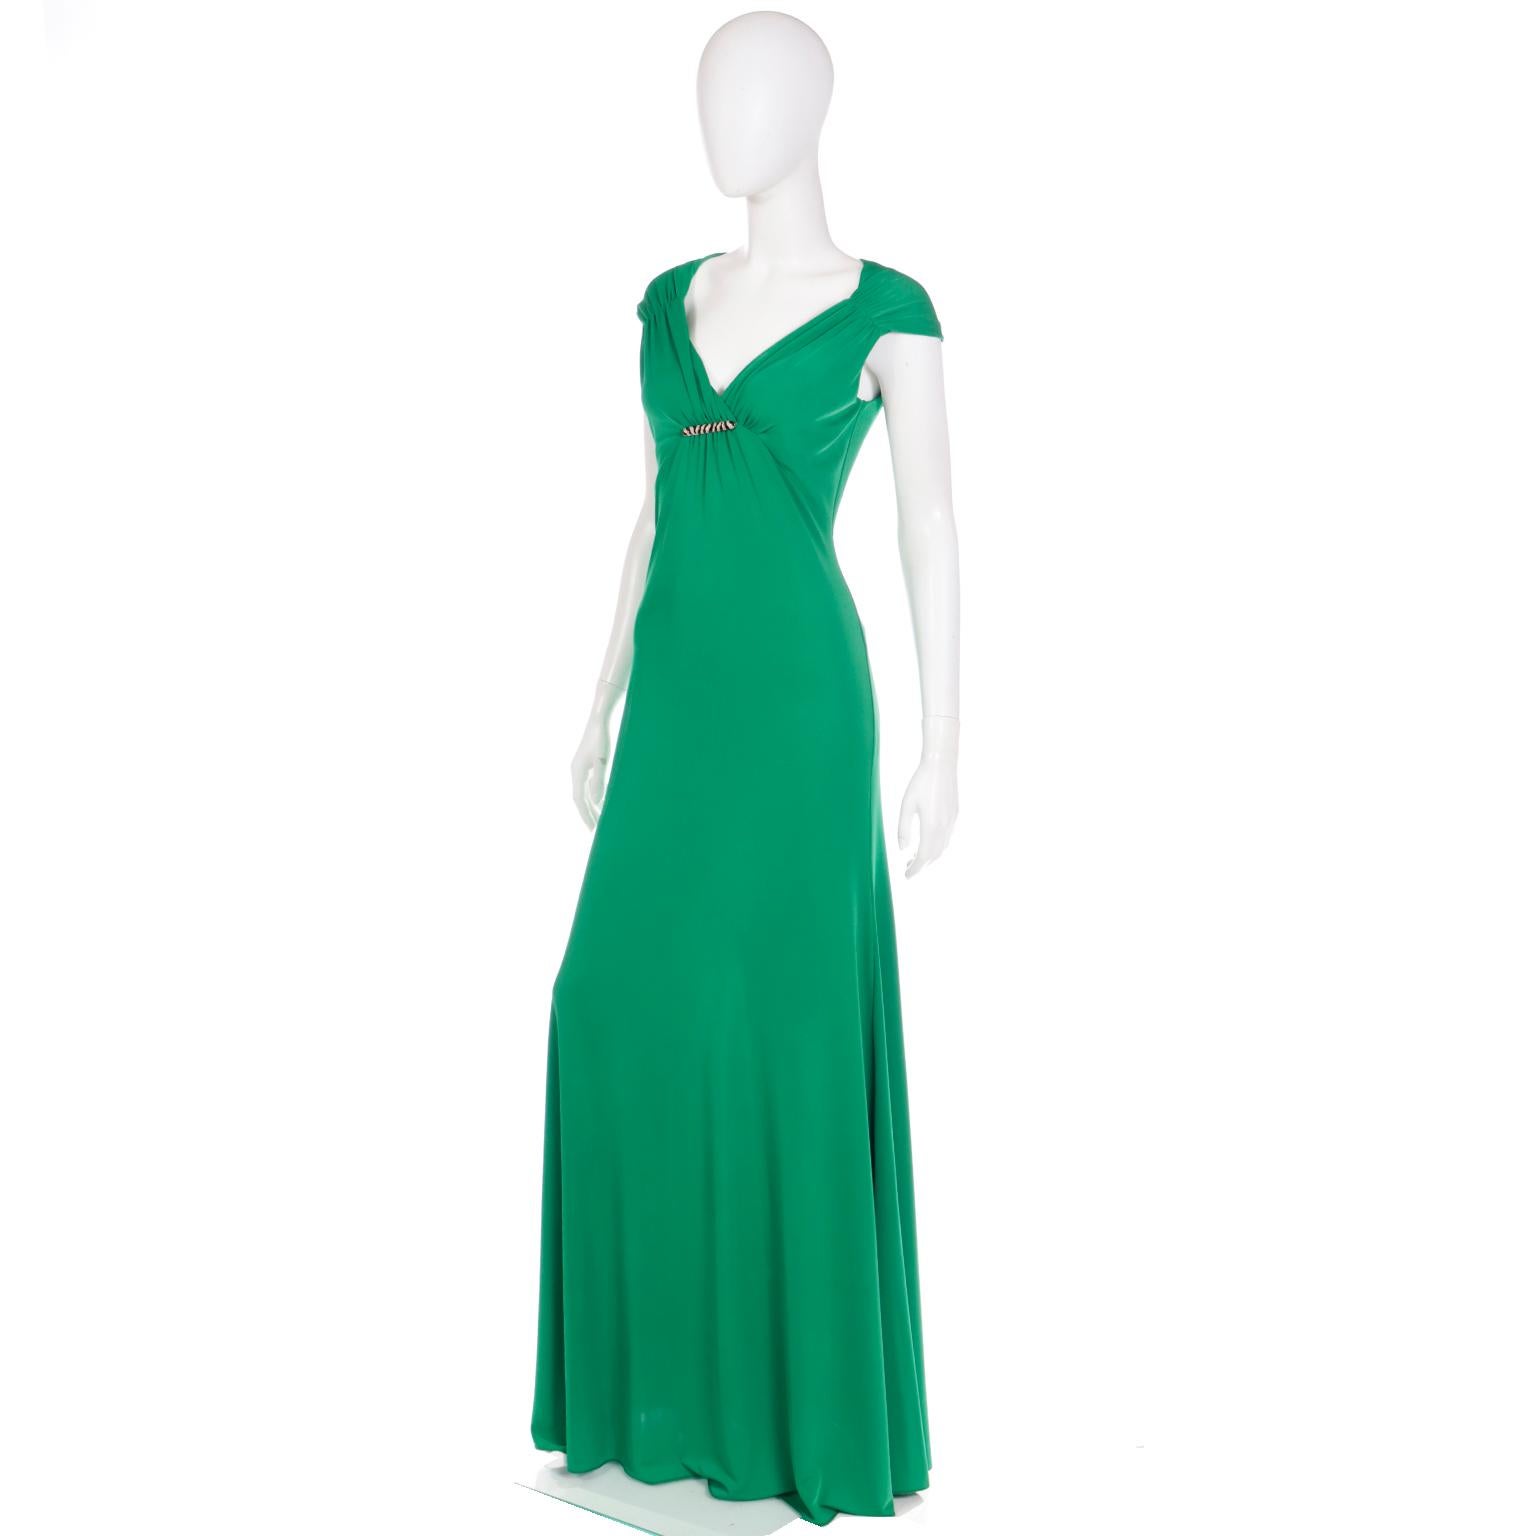 Roberto Cavalli Green Jersey Low V Neck Full Length Evening Dress W Open Back In Excellent Condition For Sale In Portland, OR